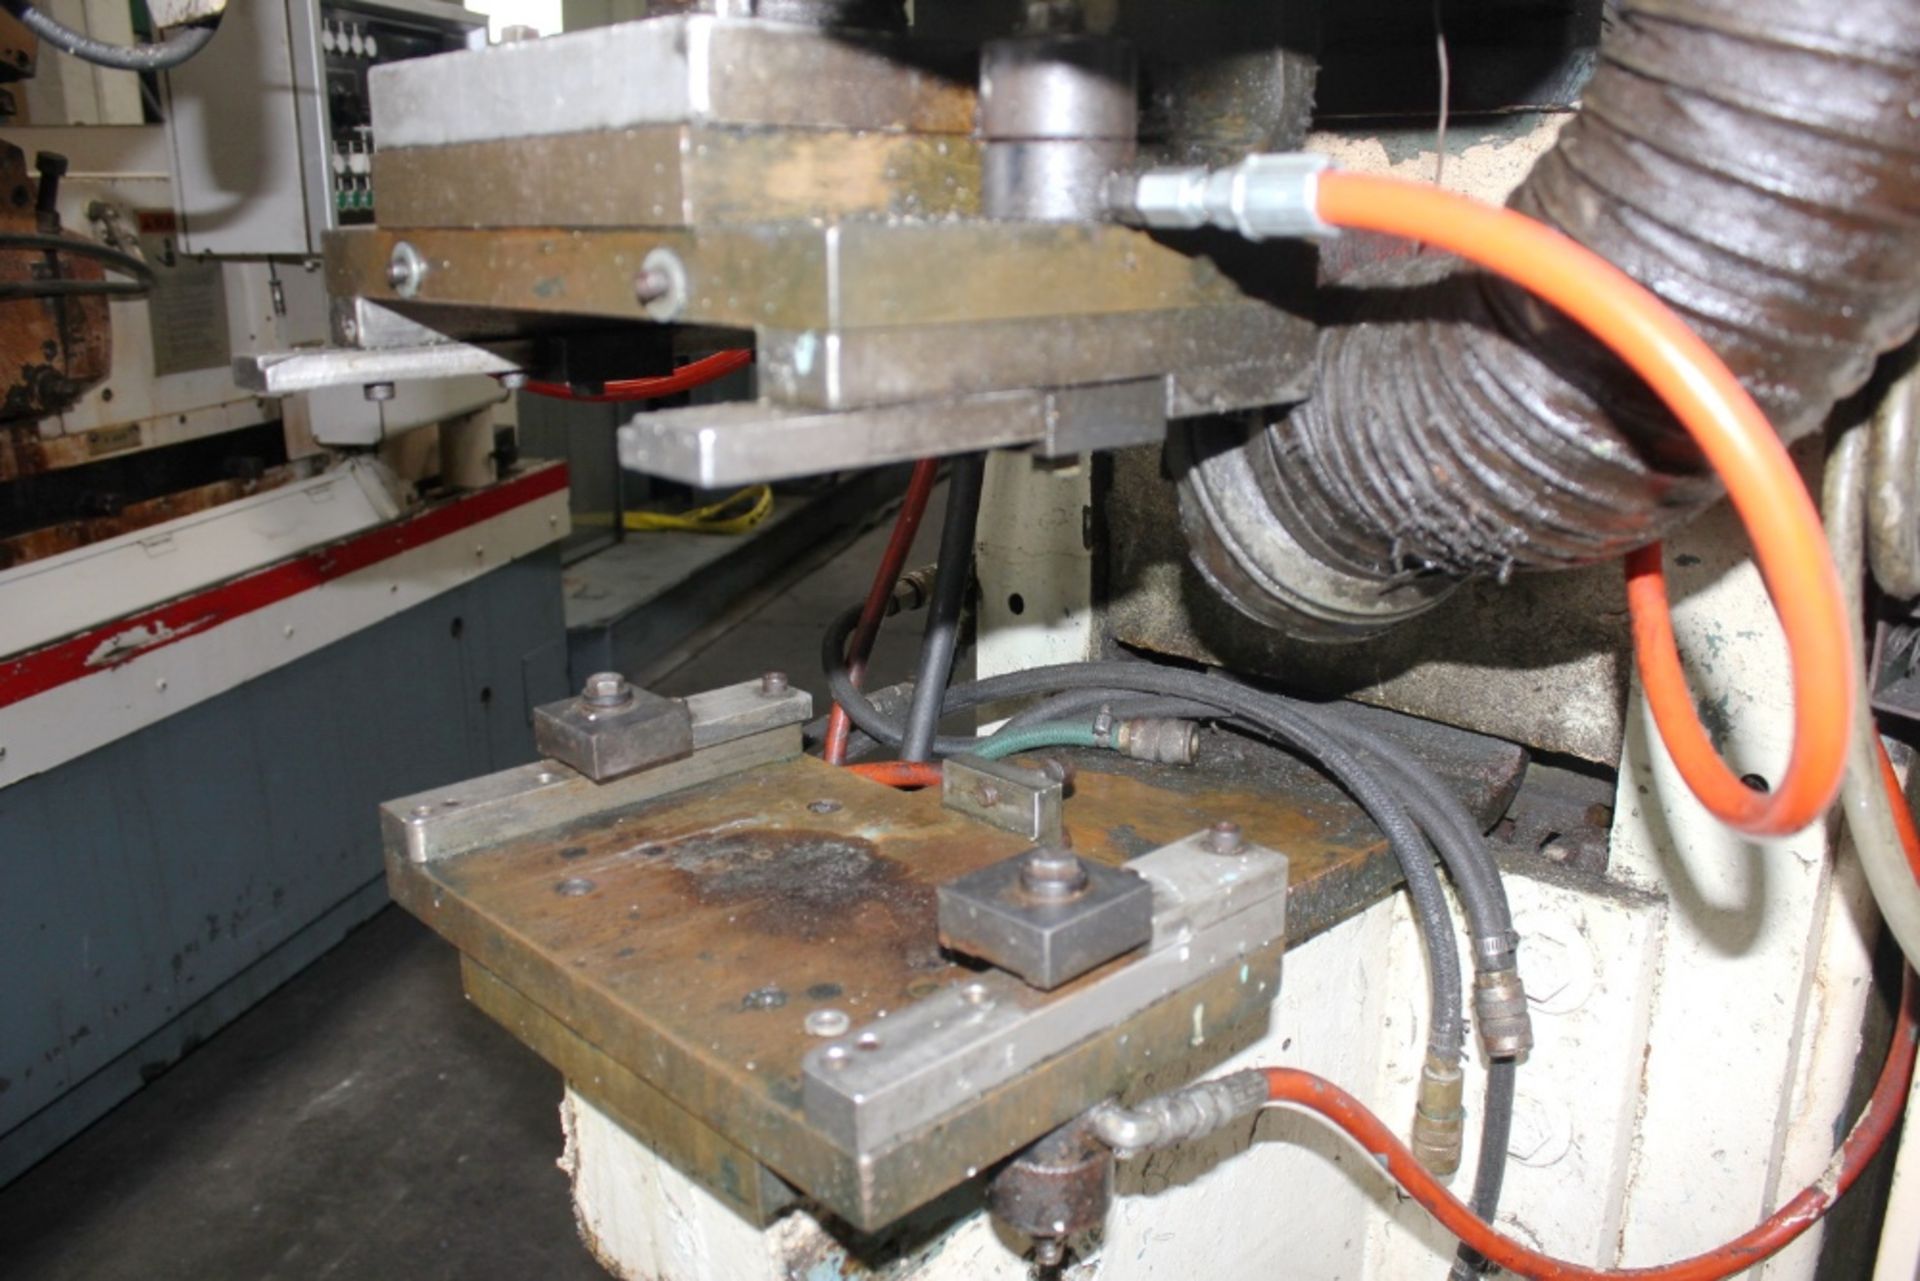 Hoffman Press Type Spot Welder 125 KVA x 14''. LOADING FEE FOR THIS LOT: $150 - Image 11 of 18